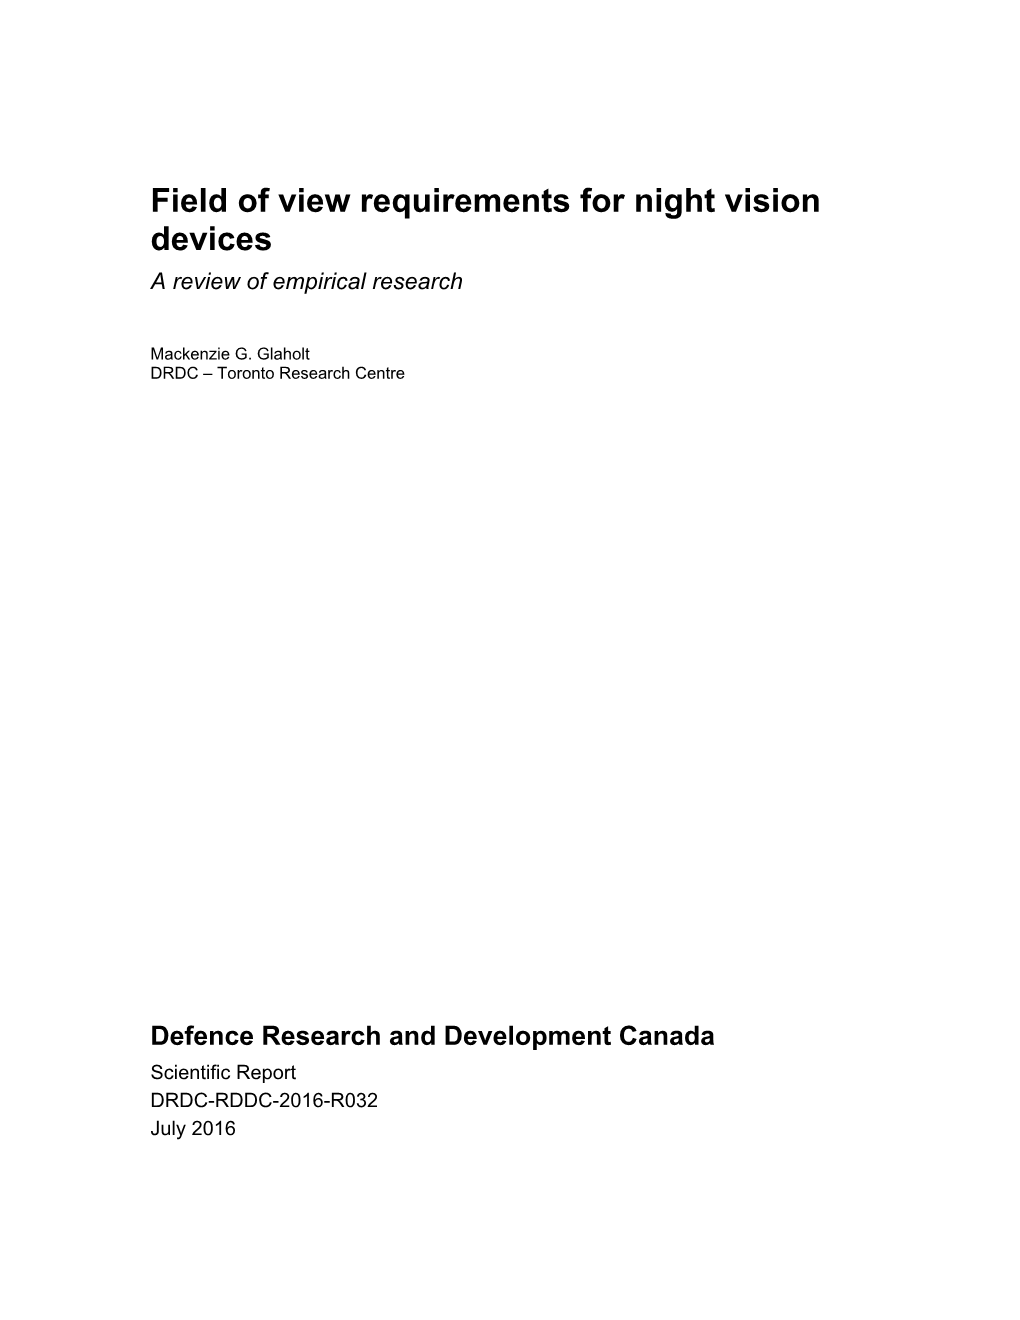 Field of View Requirements for Night Vision Devices a Review of Empirical Research